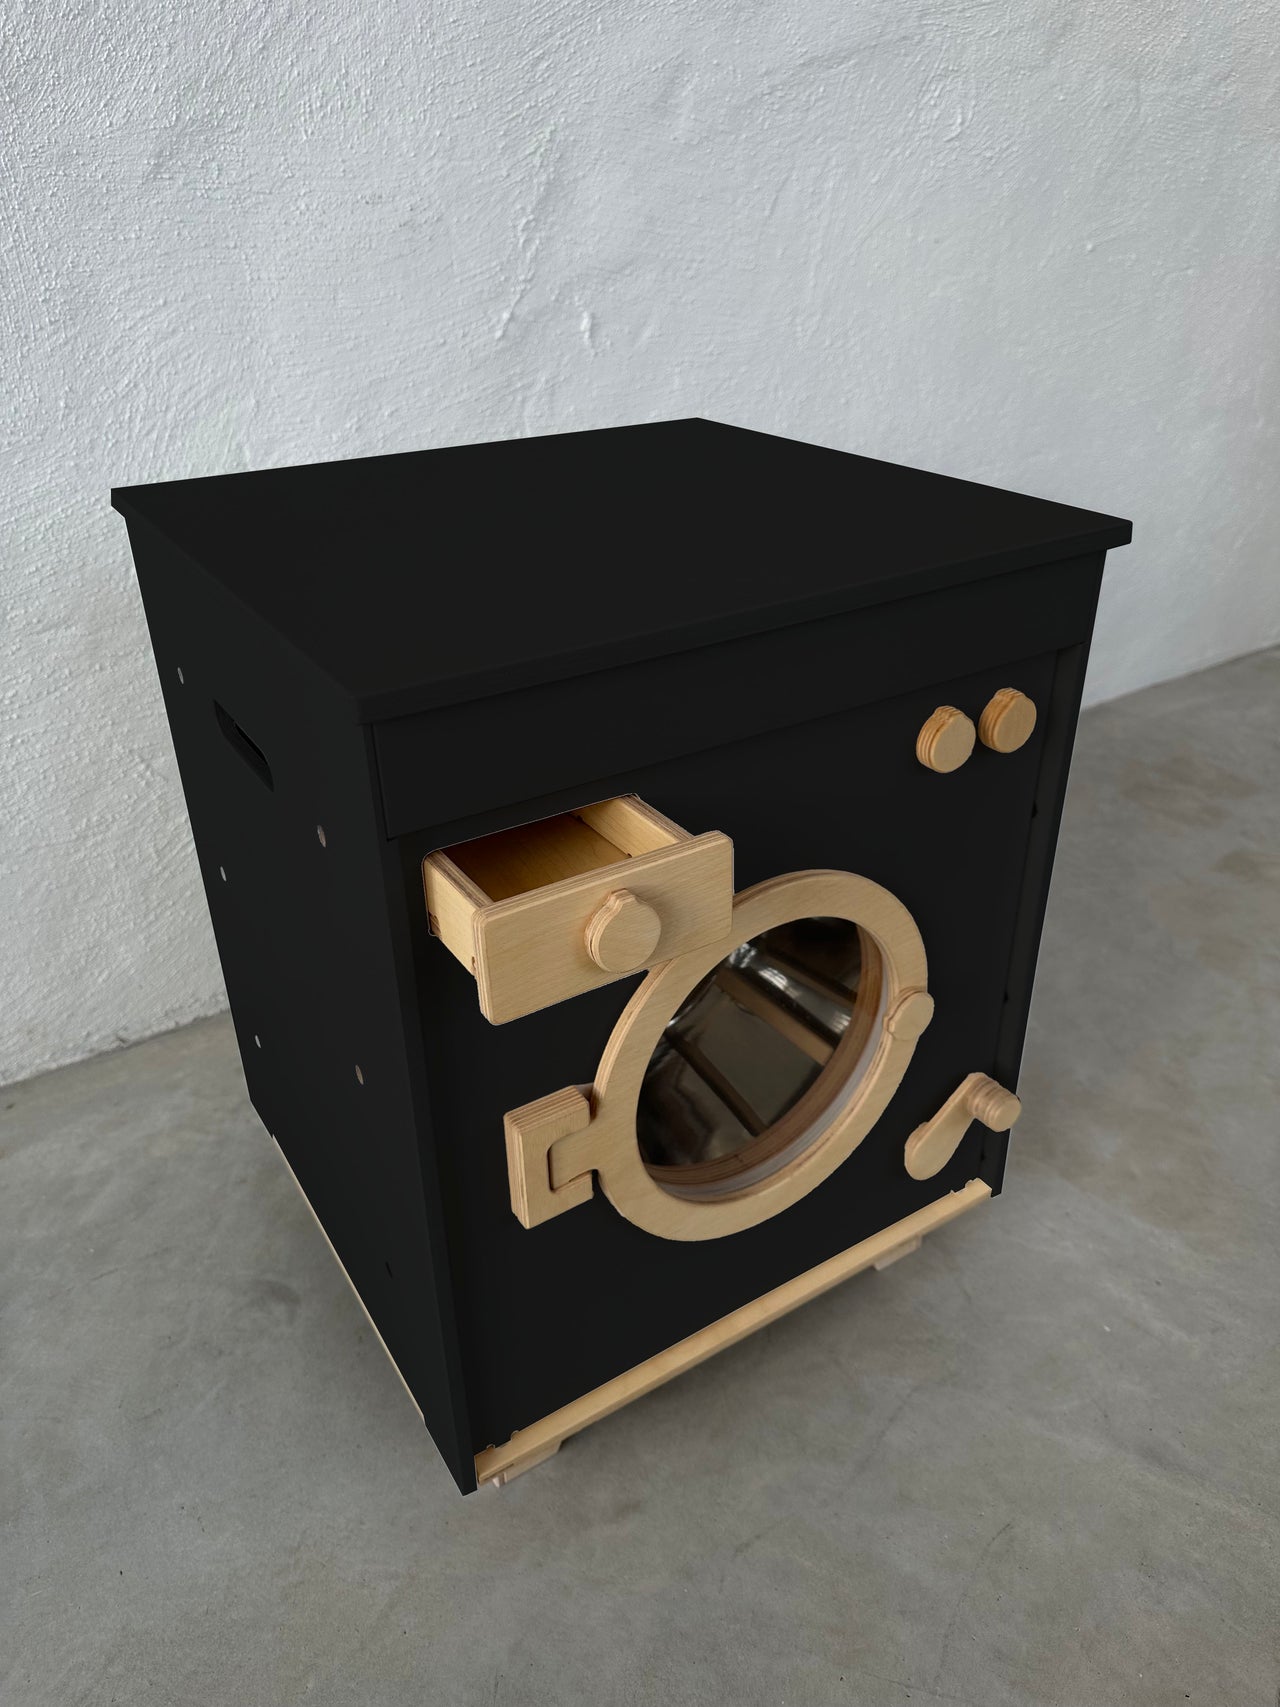 Wooden Washing Machine - Royal Black - MIDMINI - Handcrafted wooden toys for generations.